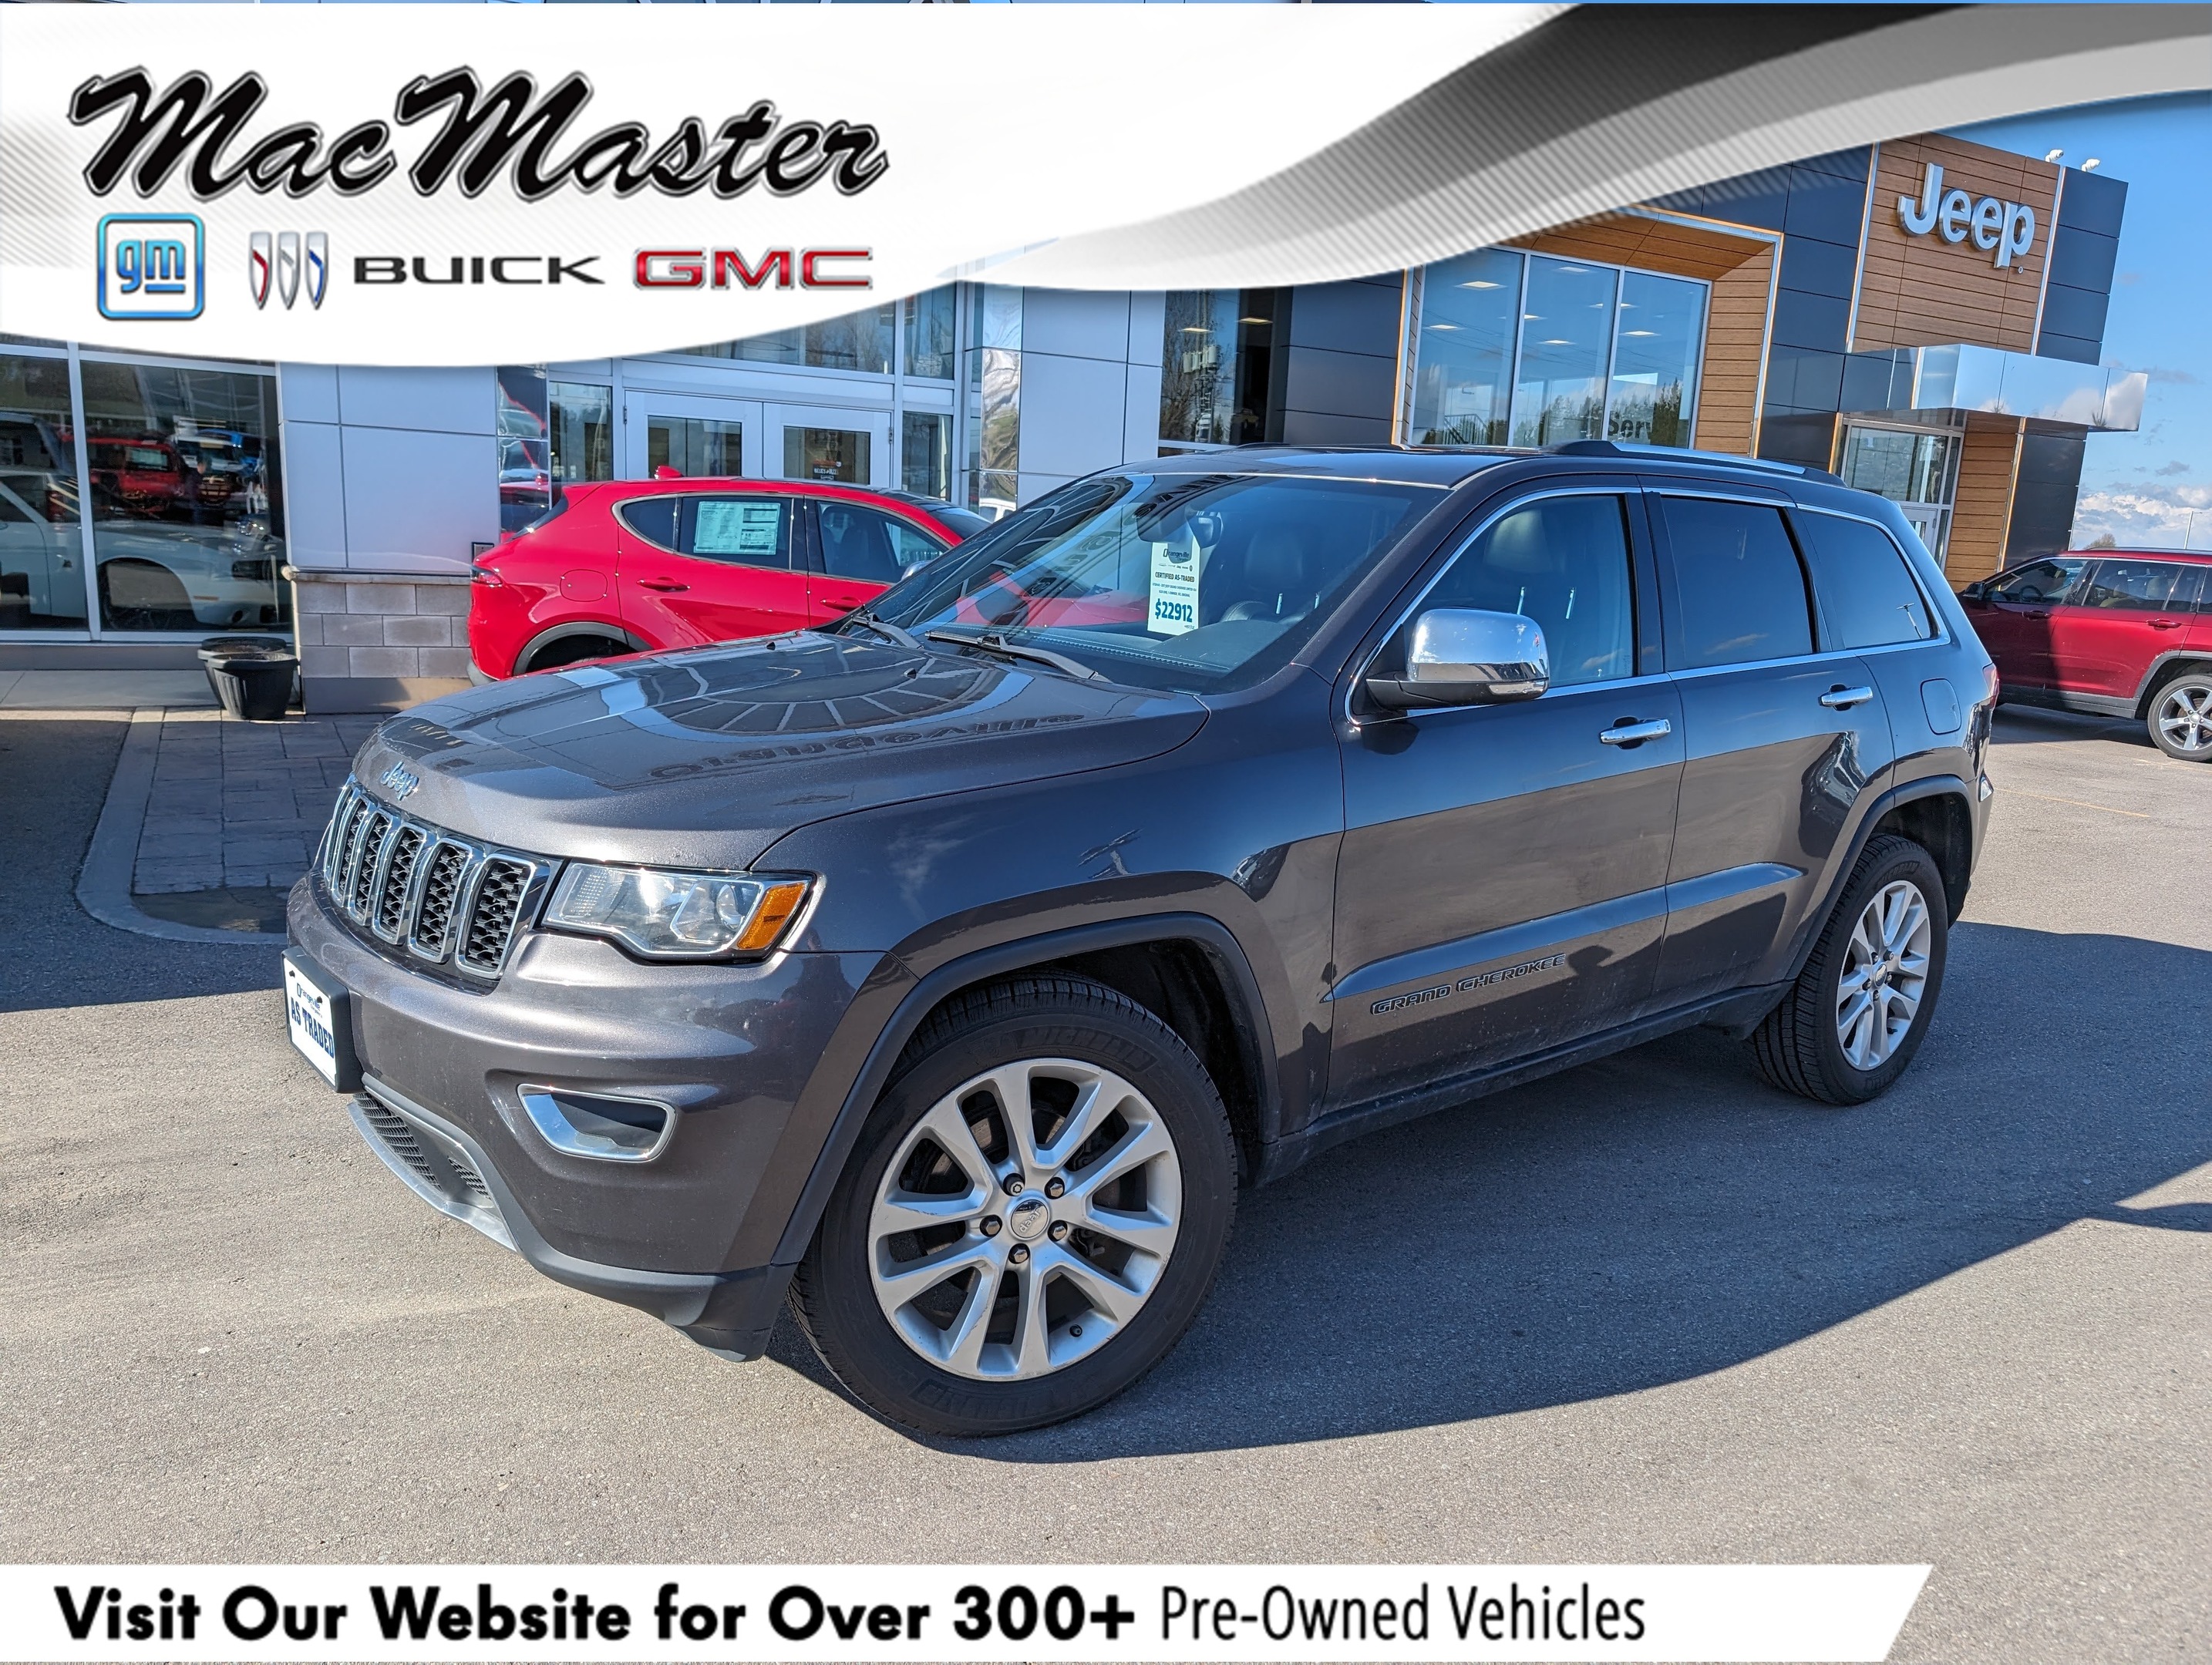 2017 Jeep Grand Cherokee LIMITED 4X4, NAV, ROOF, HTD LEATHER, CERTIFIED!